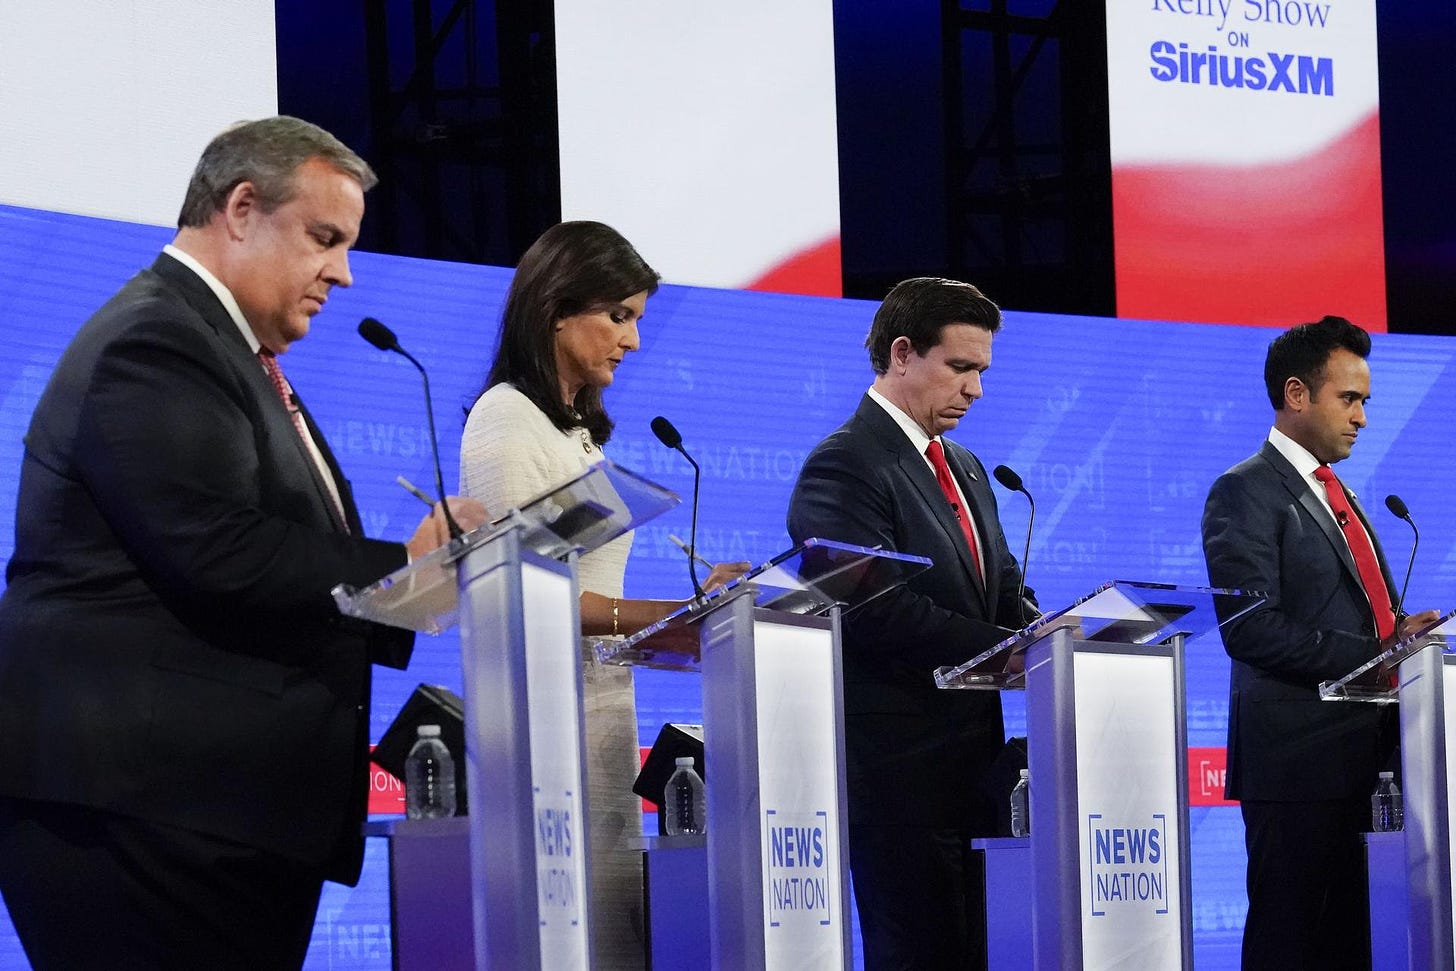 Candidates stand on stage during a Republican presidential primary debate.